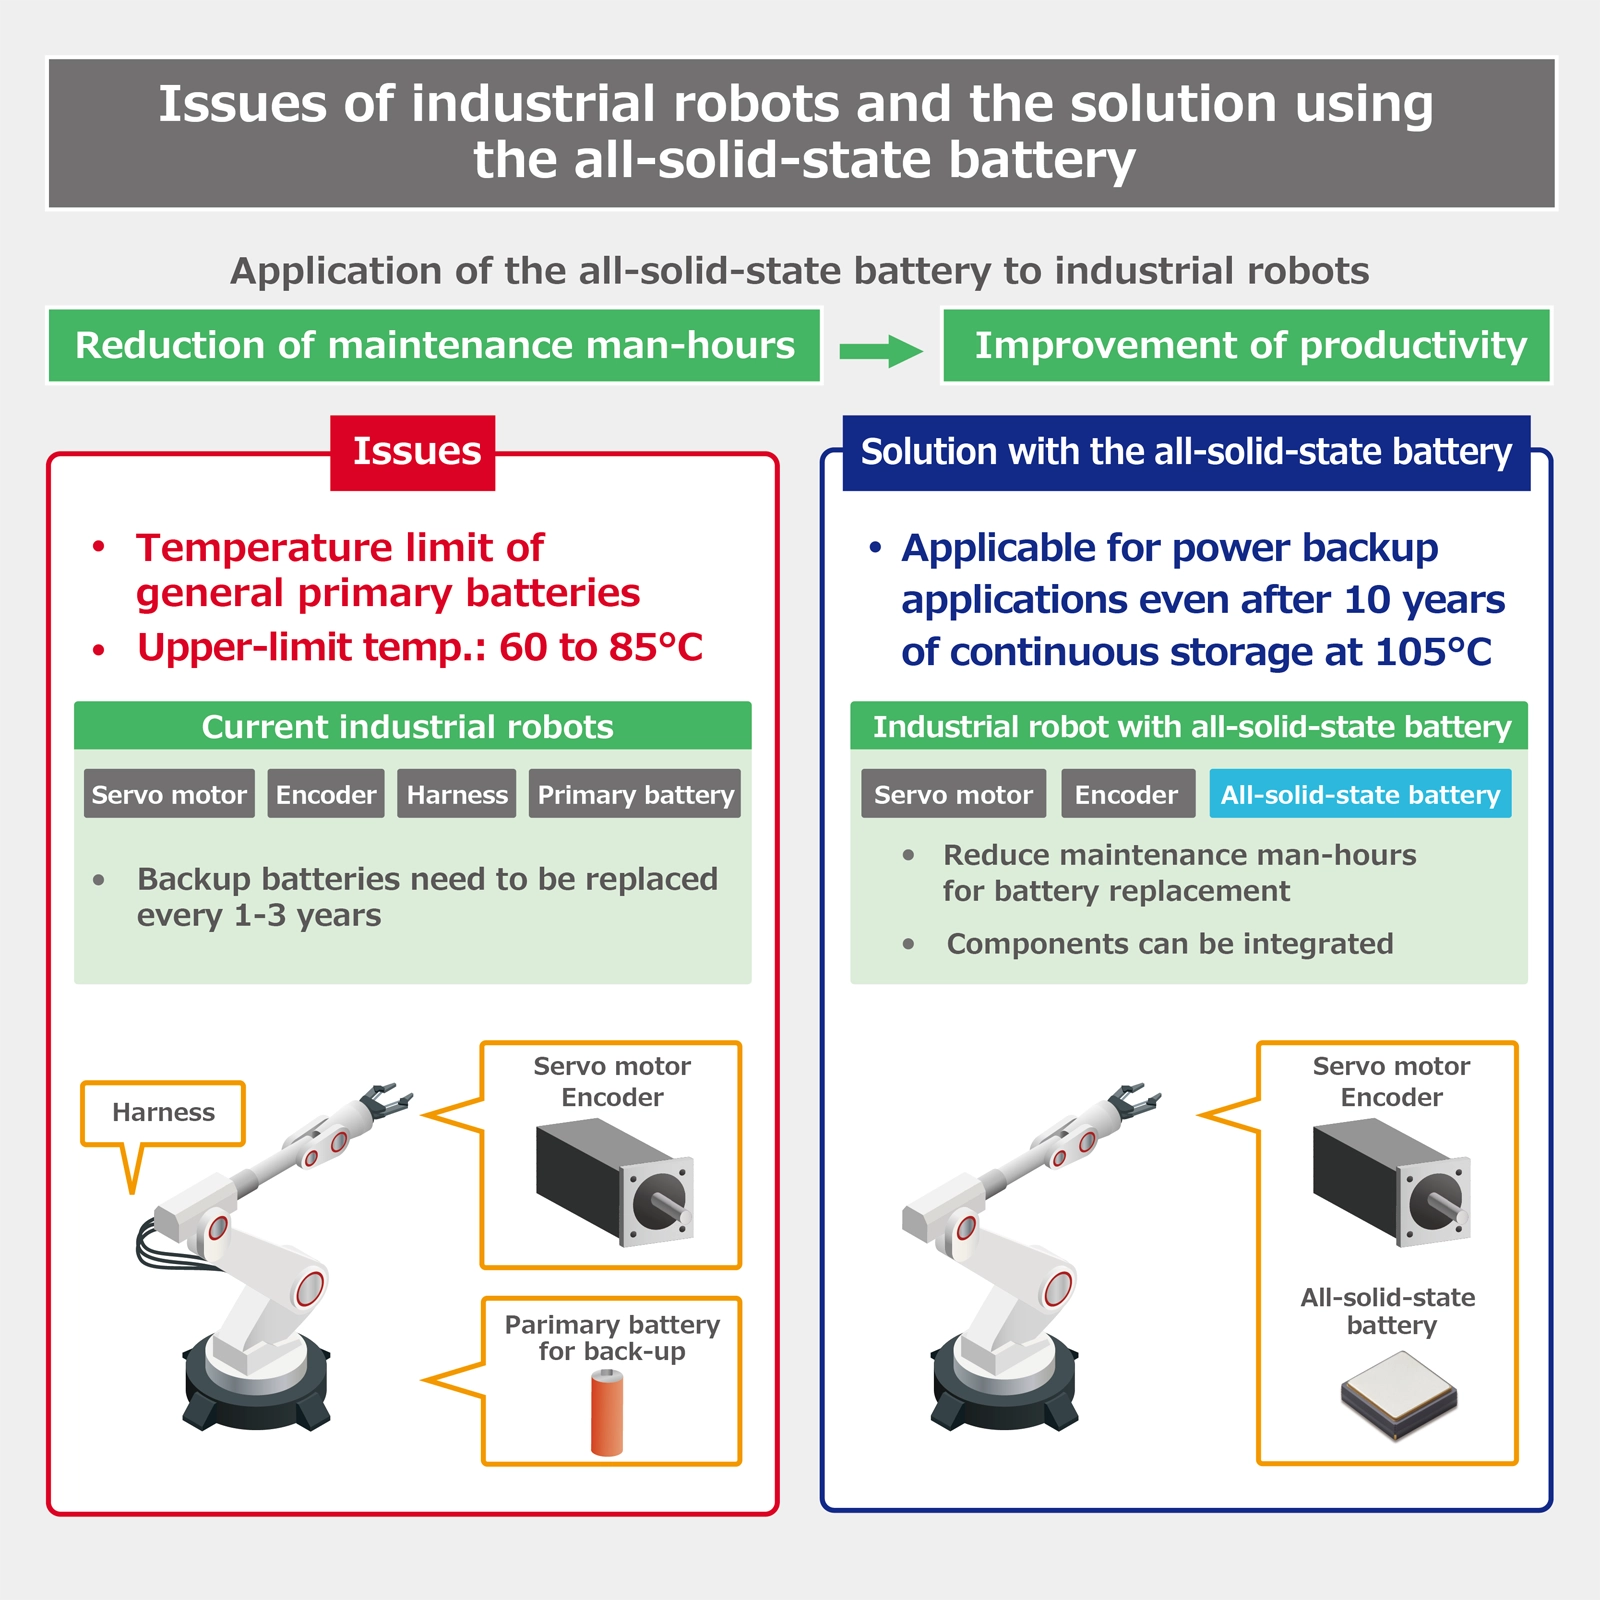 Issues of industrial robots and the solution using the all-solid-state battery